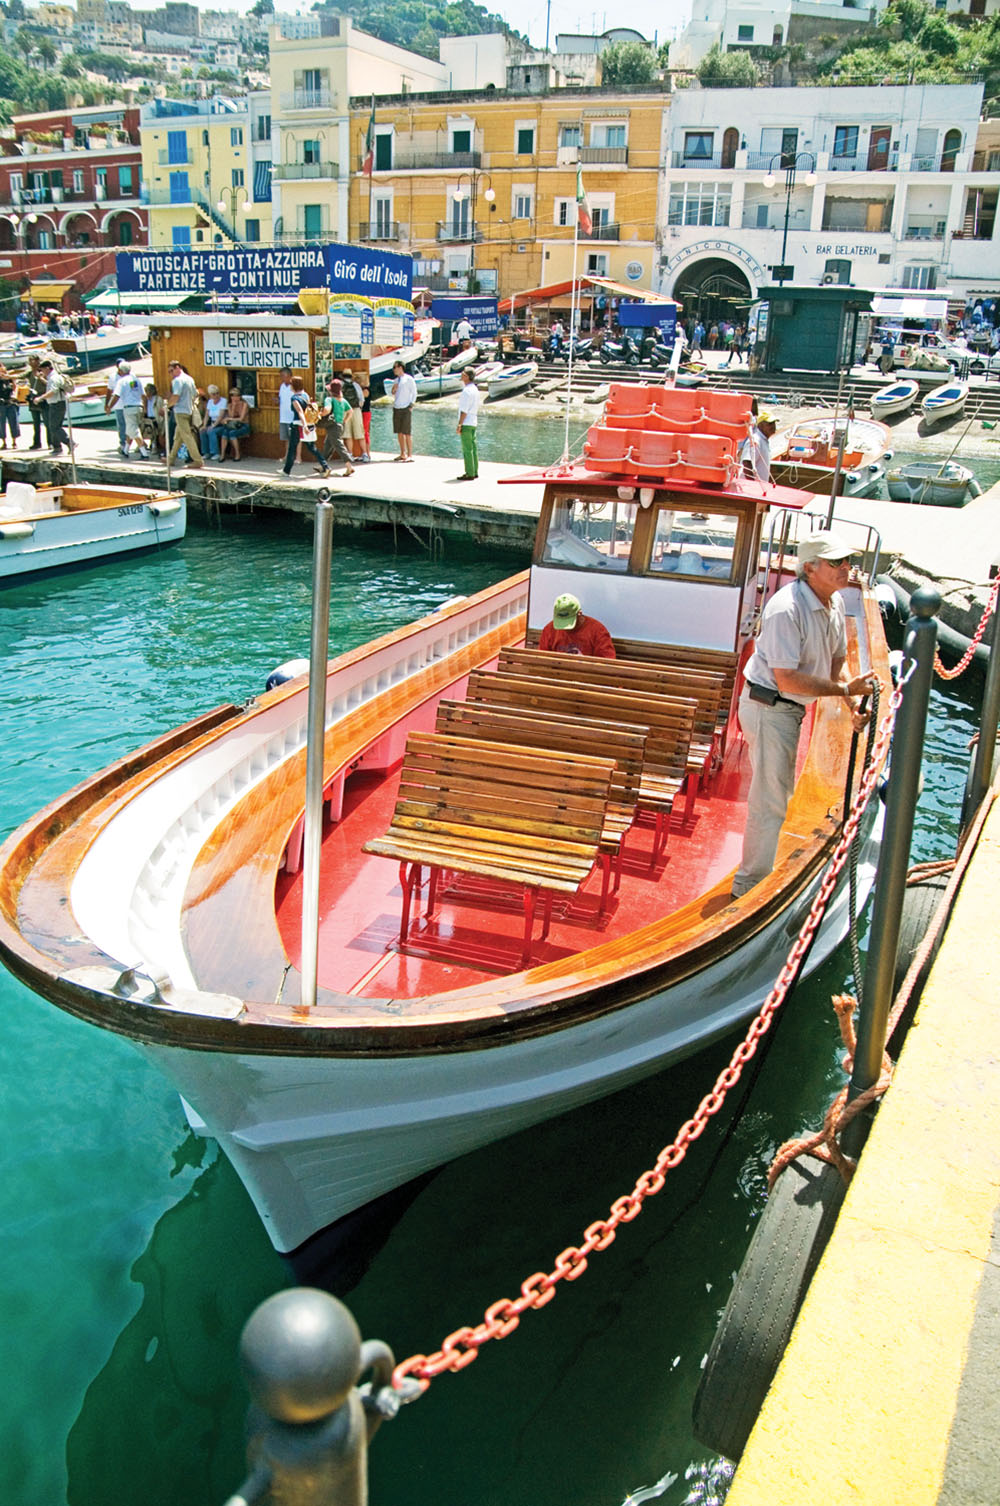 G3T1FG An old-fashioned boat for taking tourists to the blue grotto in the harbour on the Isle of Capri in the Bay of Naples, Italy